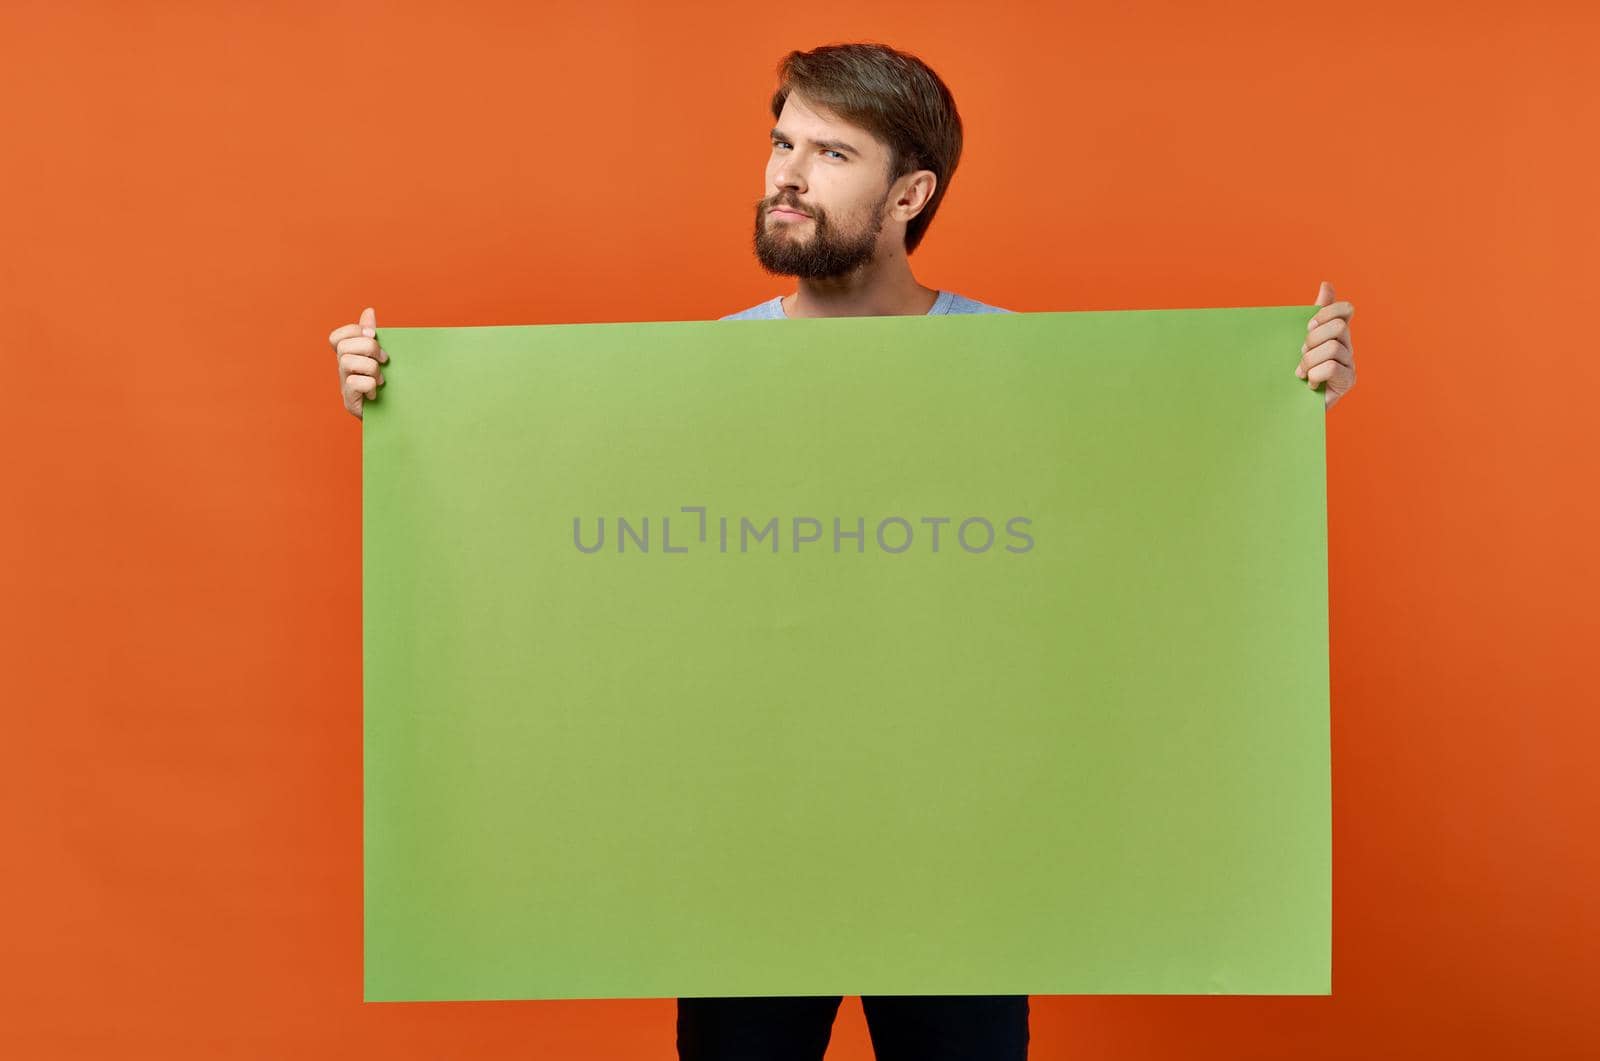 emotional man holding a green banner design studio lifestyle. High quality photo